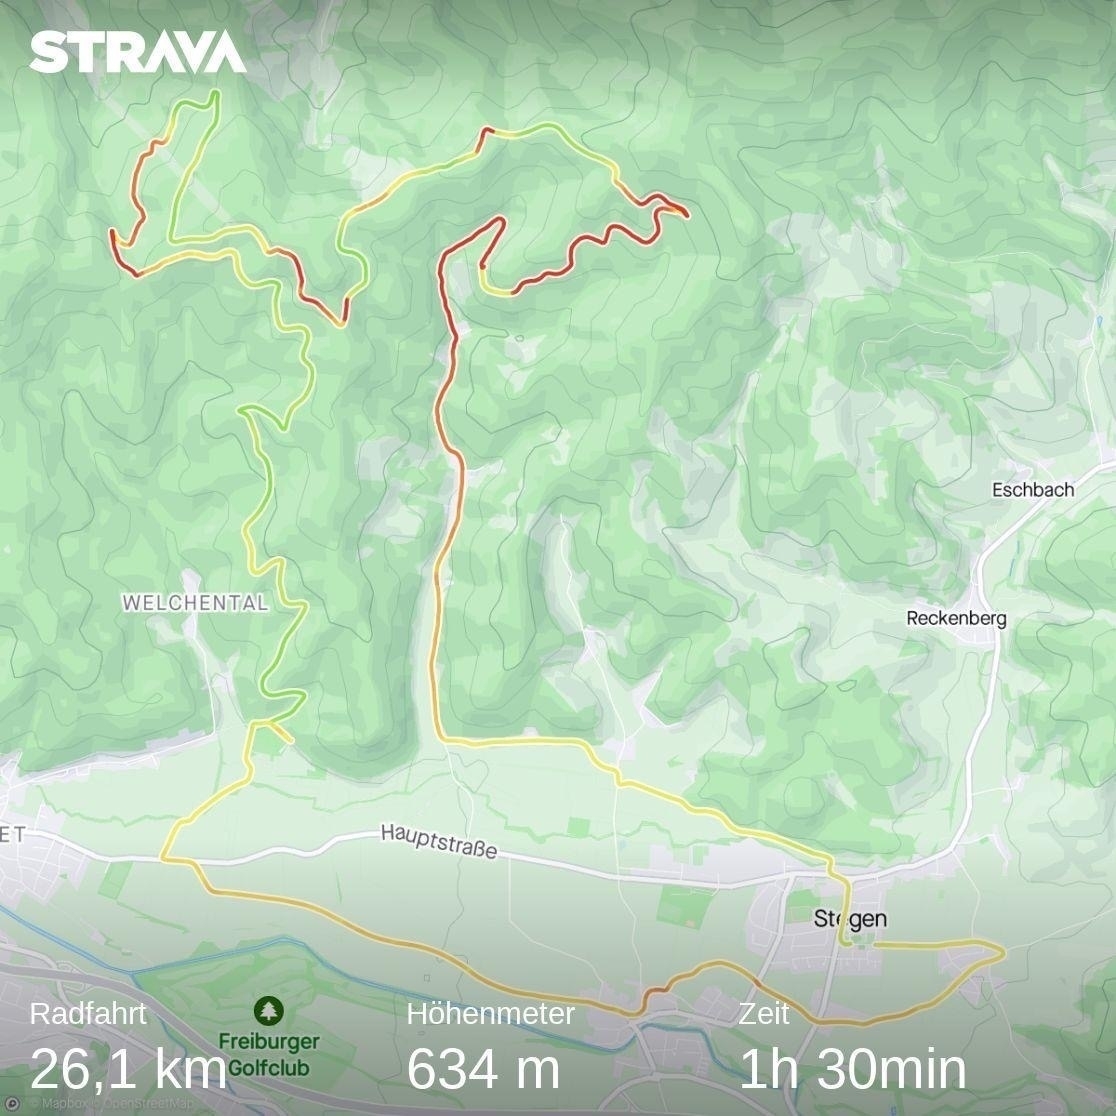 Strava map of mountain bike ride on 19 Feb 2023 in the forest north of the town of Stegen, Germany.